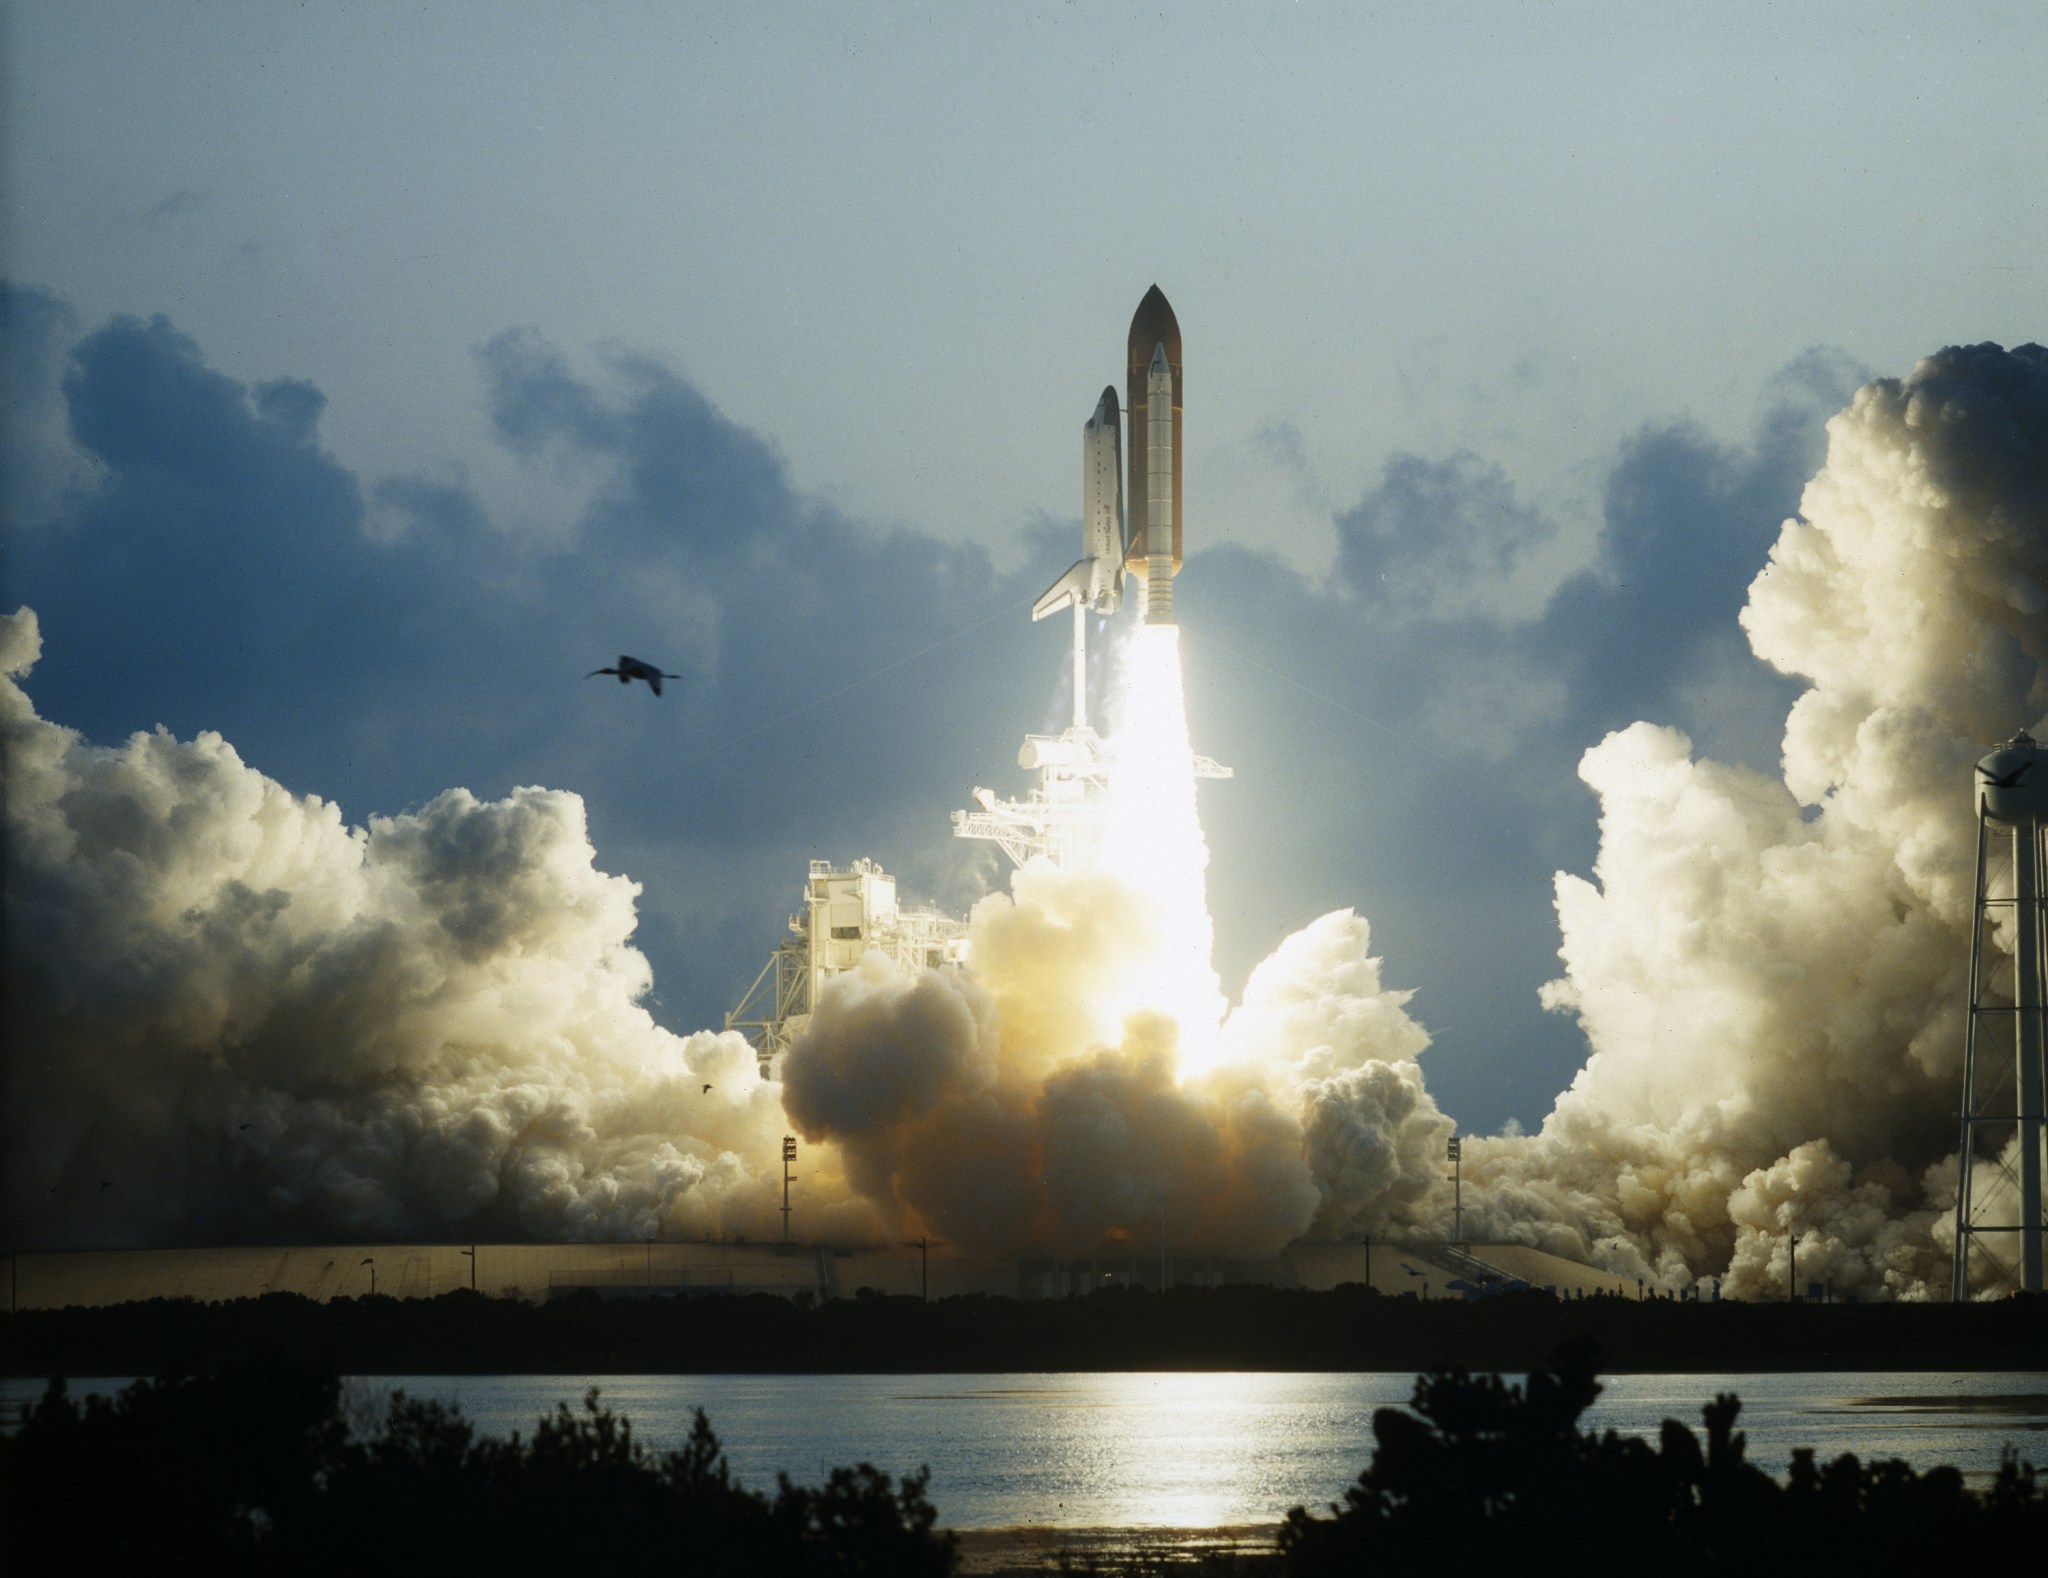 This week in 1992, STS-49 launched from NASA’s Kennedy Space Center on the first flight of the space shuttle Endeavour. 